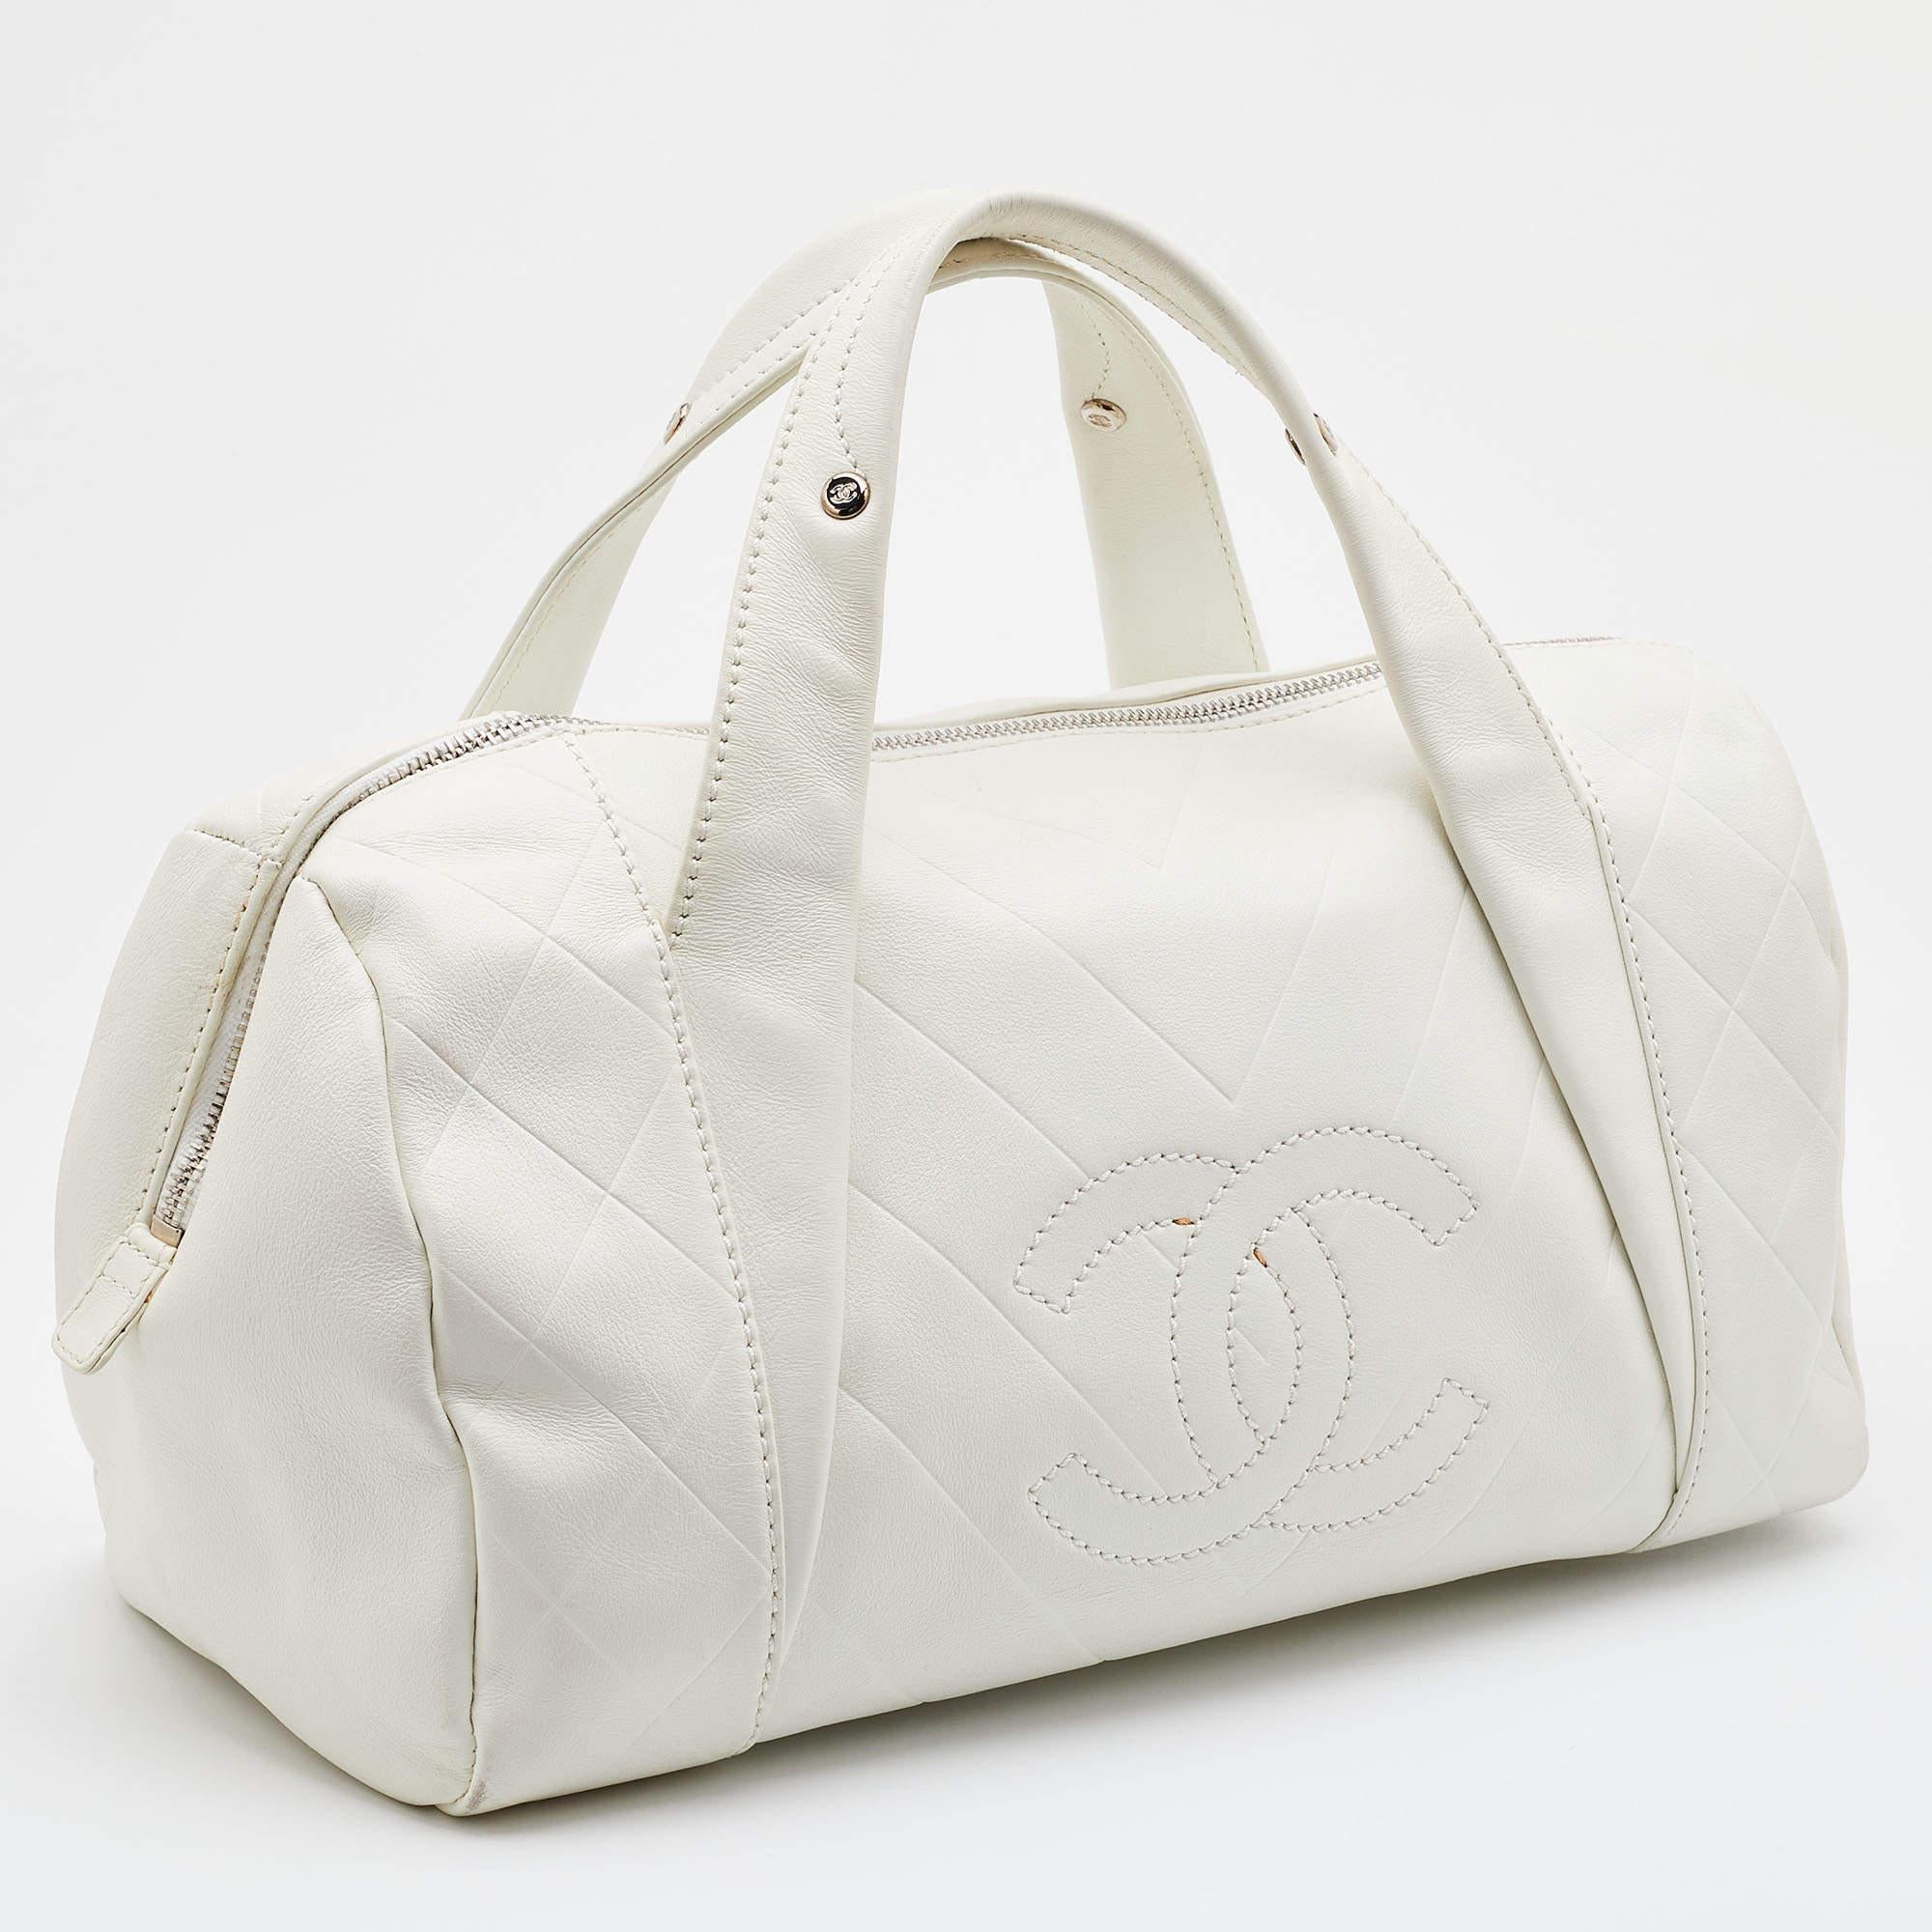 Chanel Off White Double Quilt Leather Bowler Bag In Good Condition For Sale In Dubai, Al Qouz 2